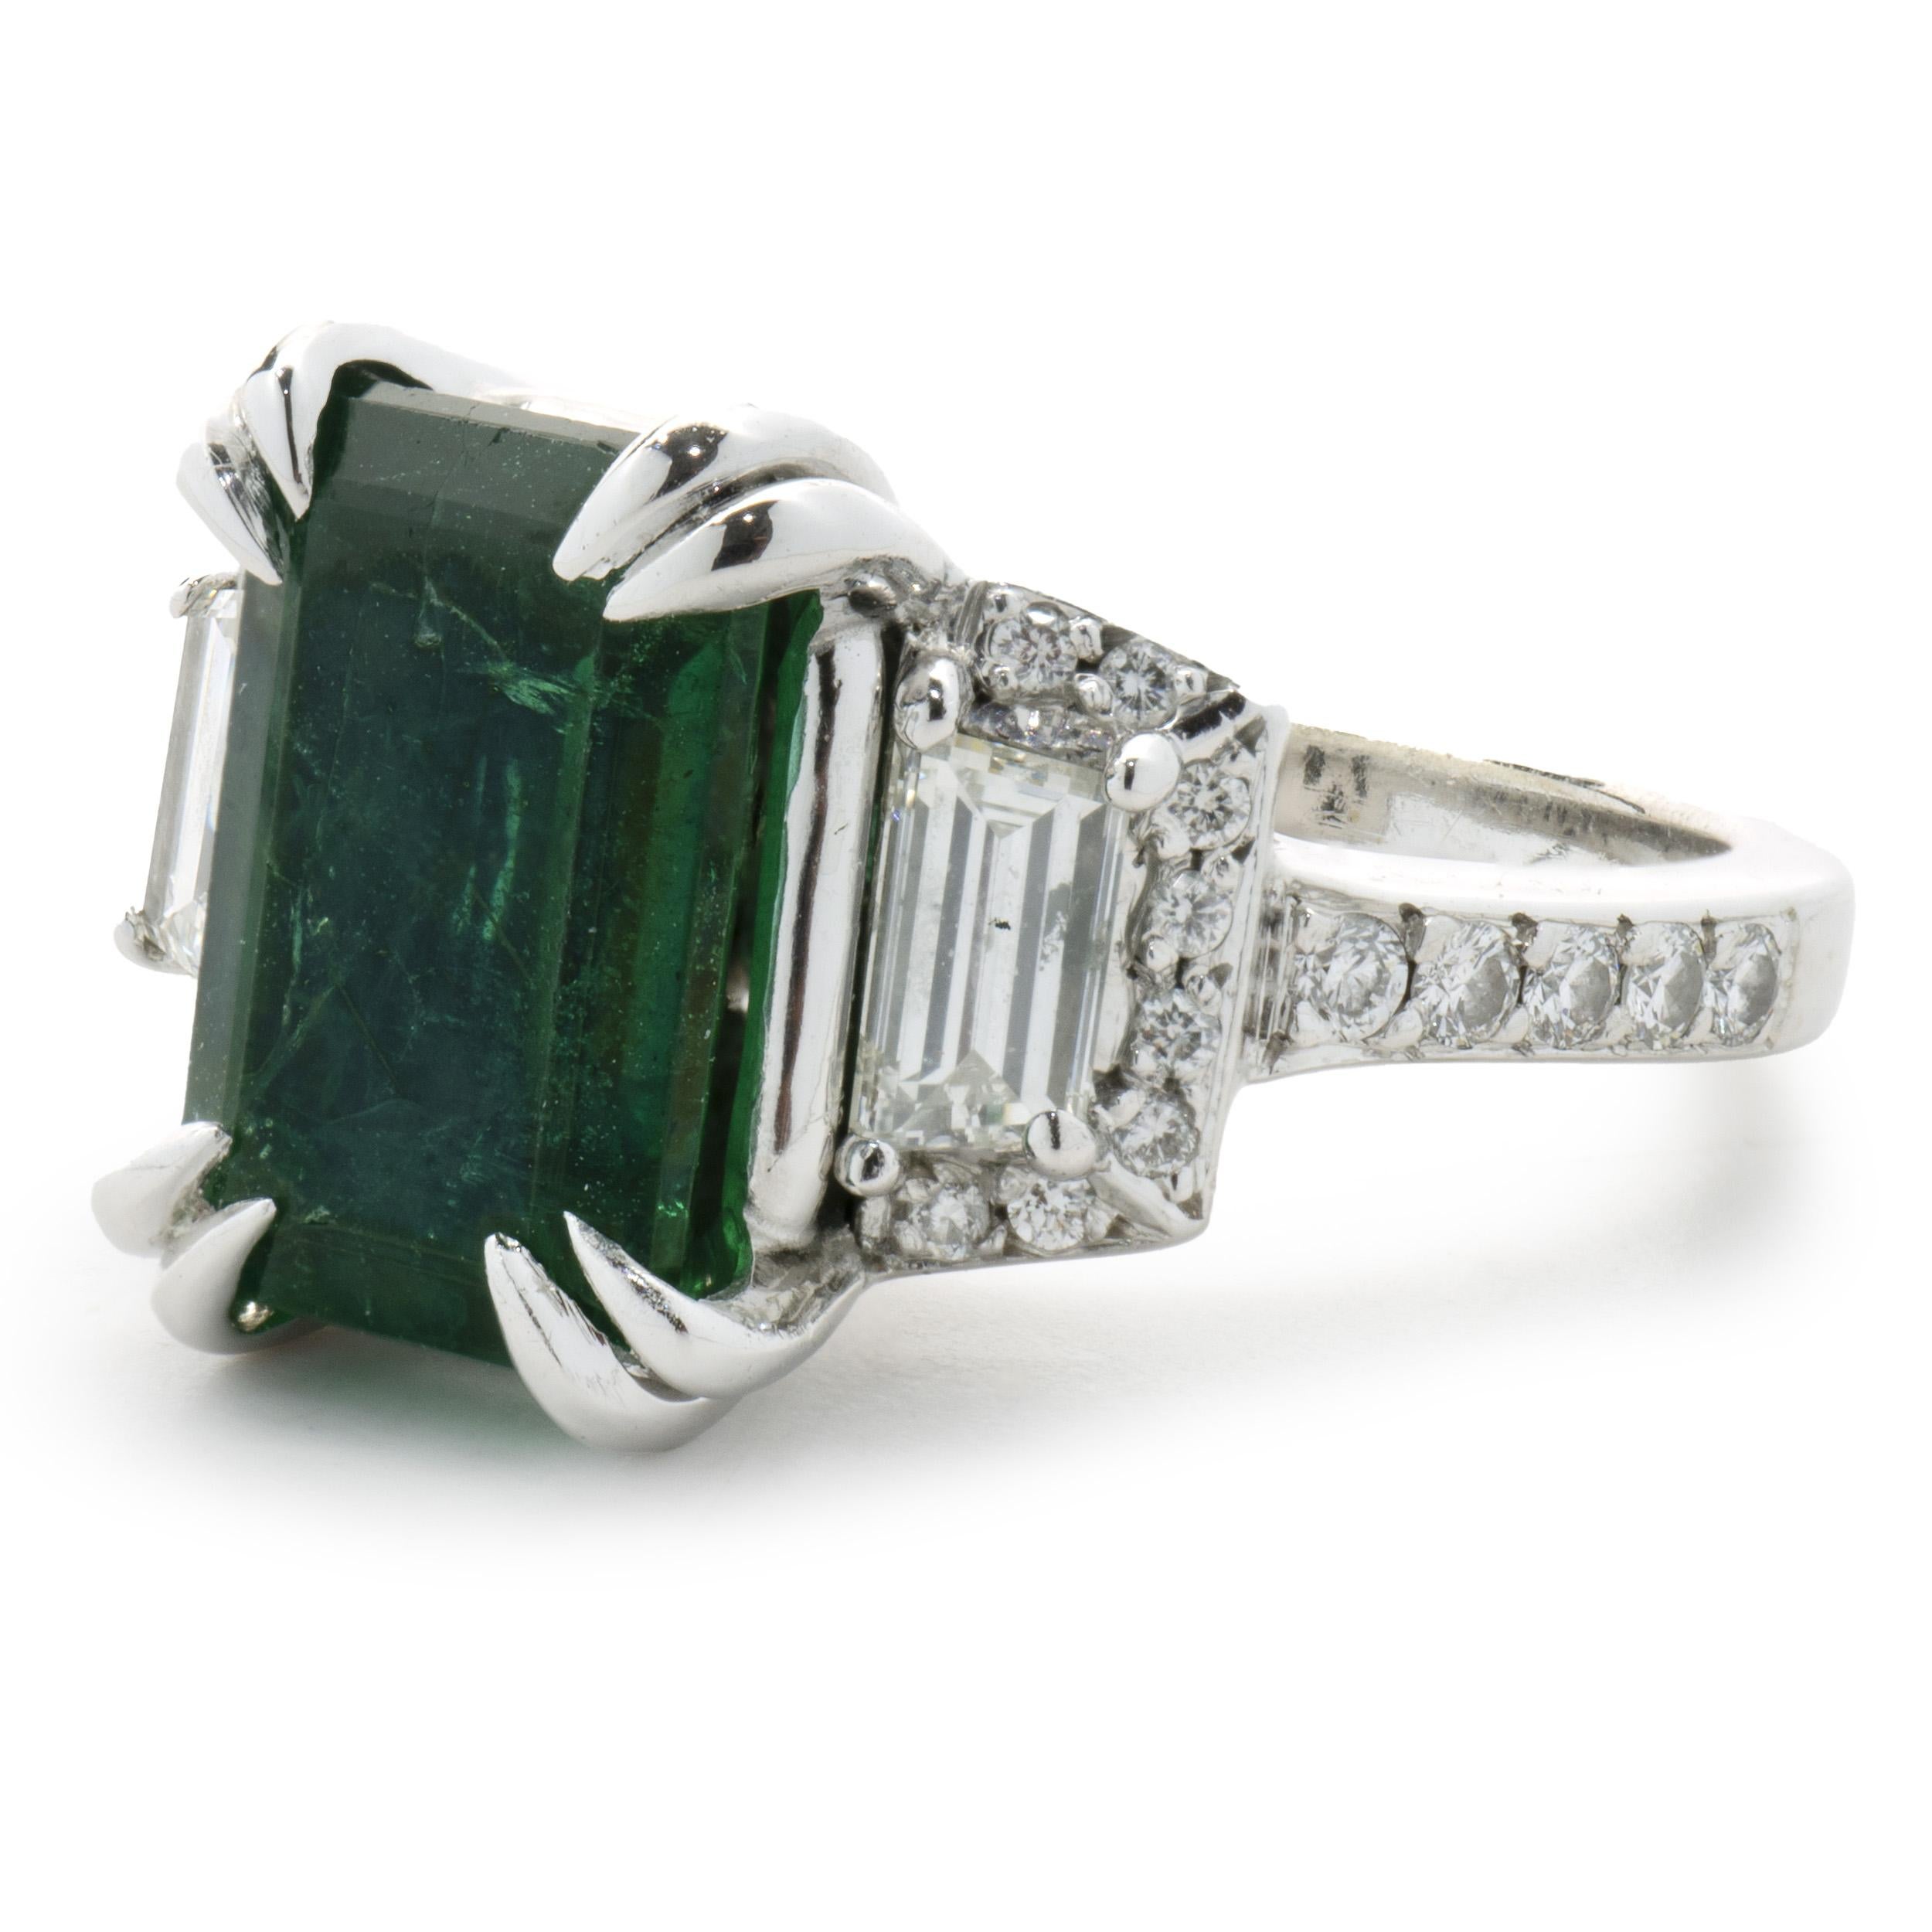 Designer: custom design
Material: 18K white gold
Diamond: 30 round brilliant cut = 0.71cttw
Color: G
Clarity: VS1-2
Emerald: 1 emerald cut = 3.00ct
Color: Shamrock
Clarity: AA
Dimensions: ring top measures 12mm wide
Ring Size: 5.5 (please allow two